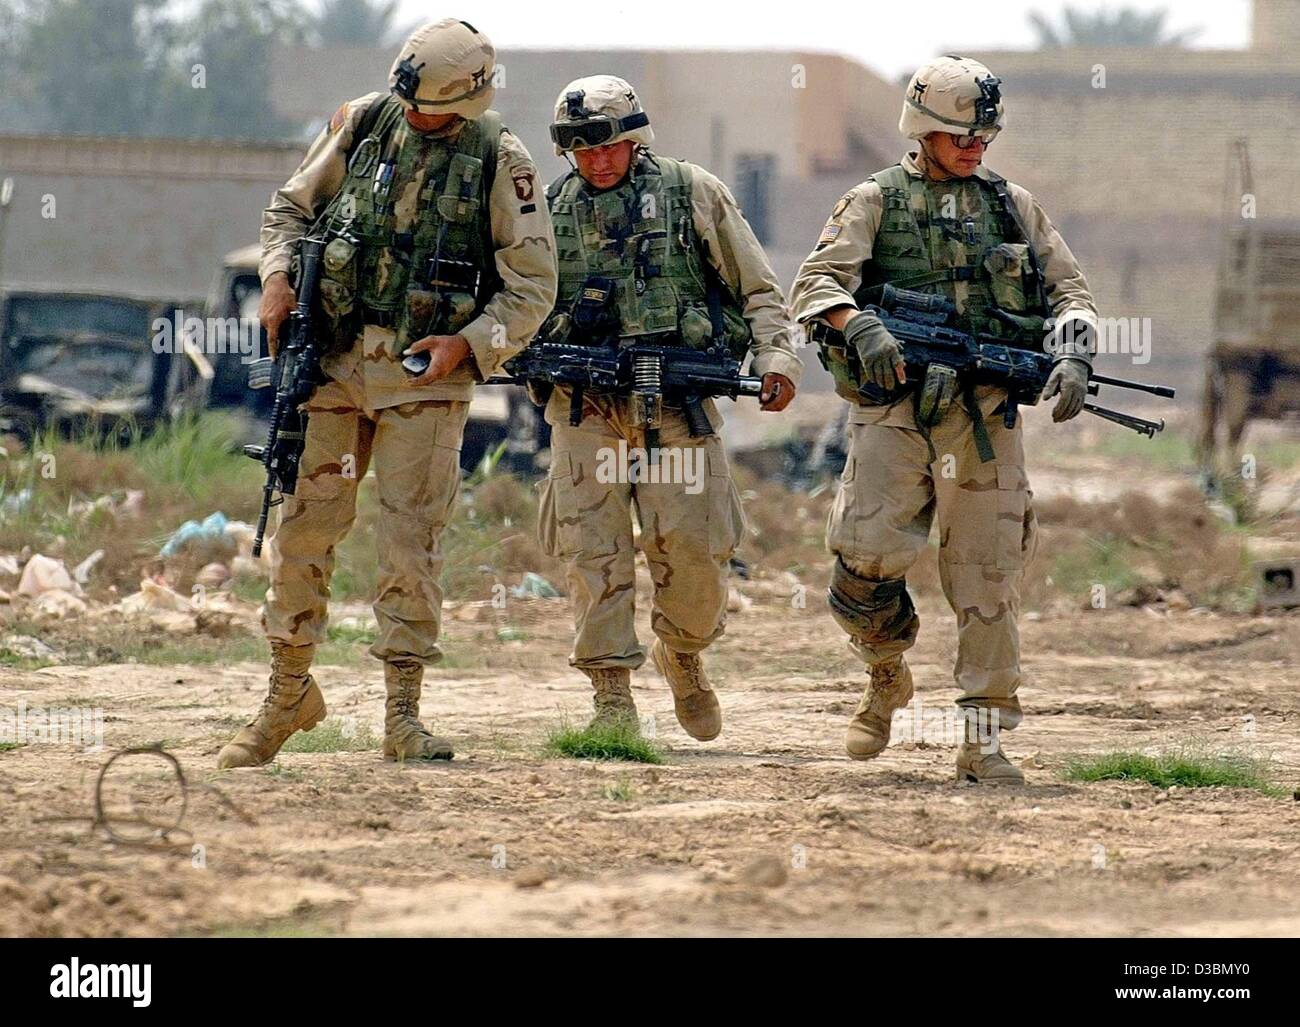 (dpa) - US soldiers search for an unexploded ordnance in a suburb of Baghdad, Iraq's capital, 24 April 2003. Stock Photo